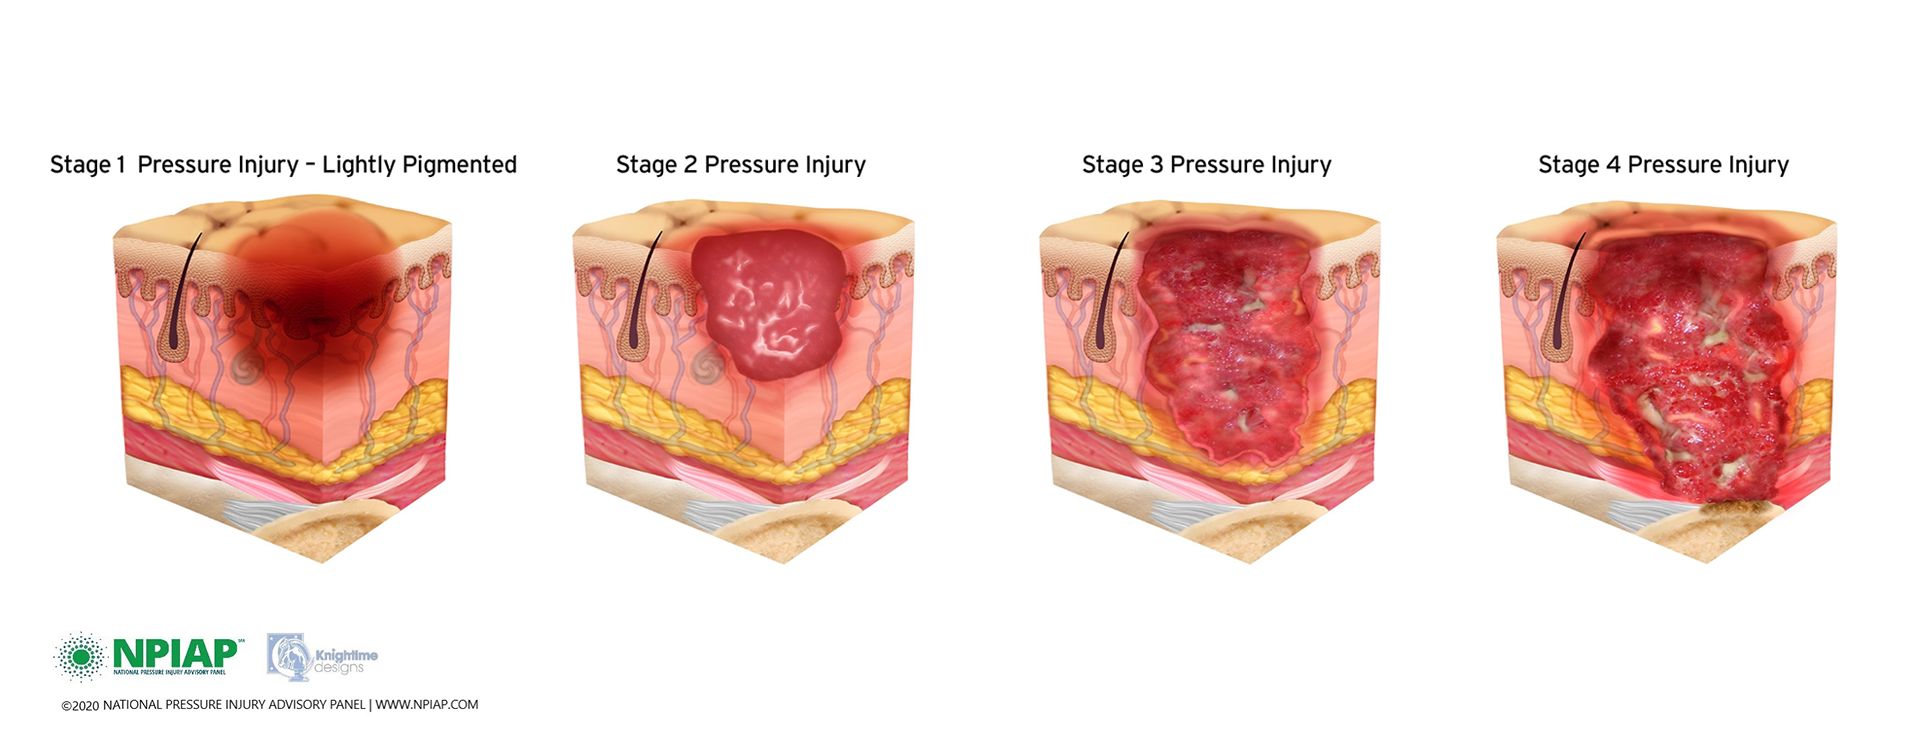 Pressure ulcer development stages